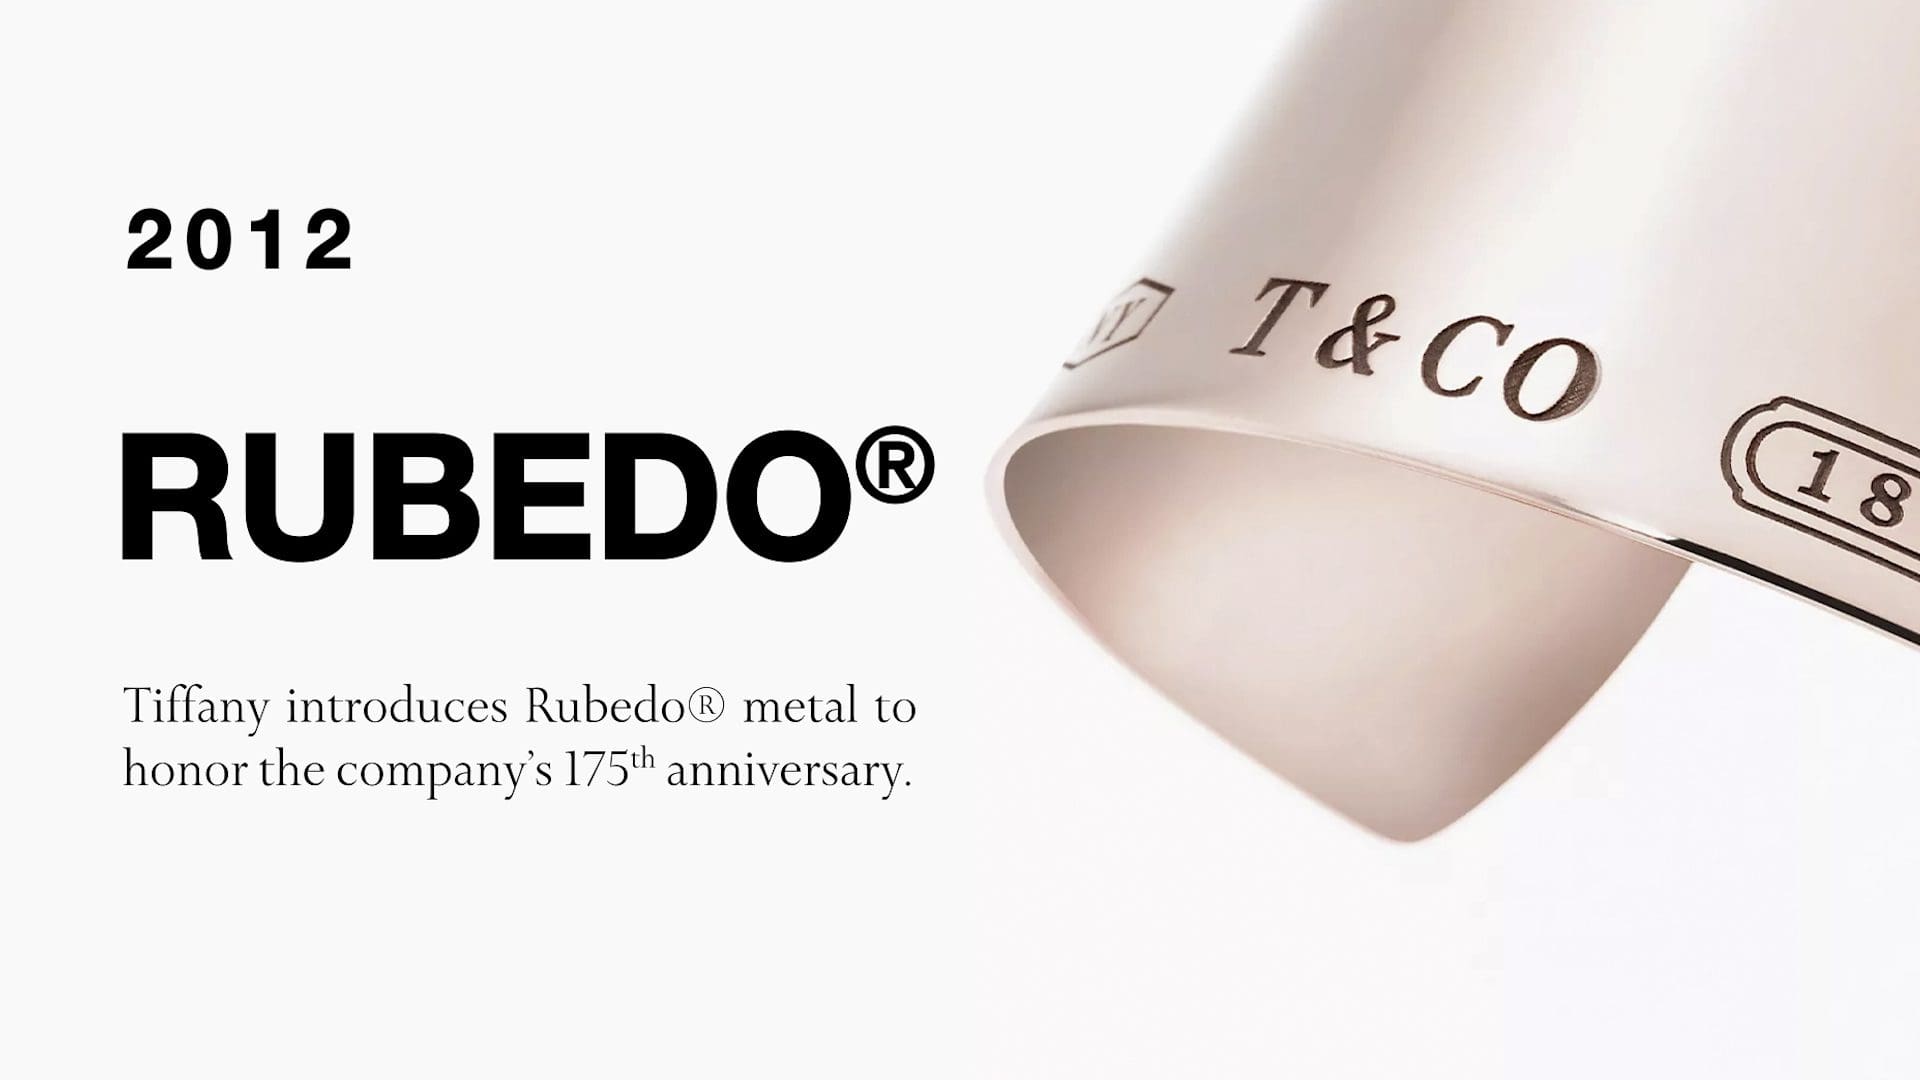 Promotional image for Tiffany & Co. from 2012, announcing the introduction of Rubedo® metal in honor of the company's 175th anniversary, featuring a curved sheet of the metal with Tiffany's branding.